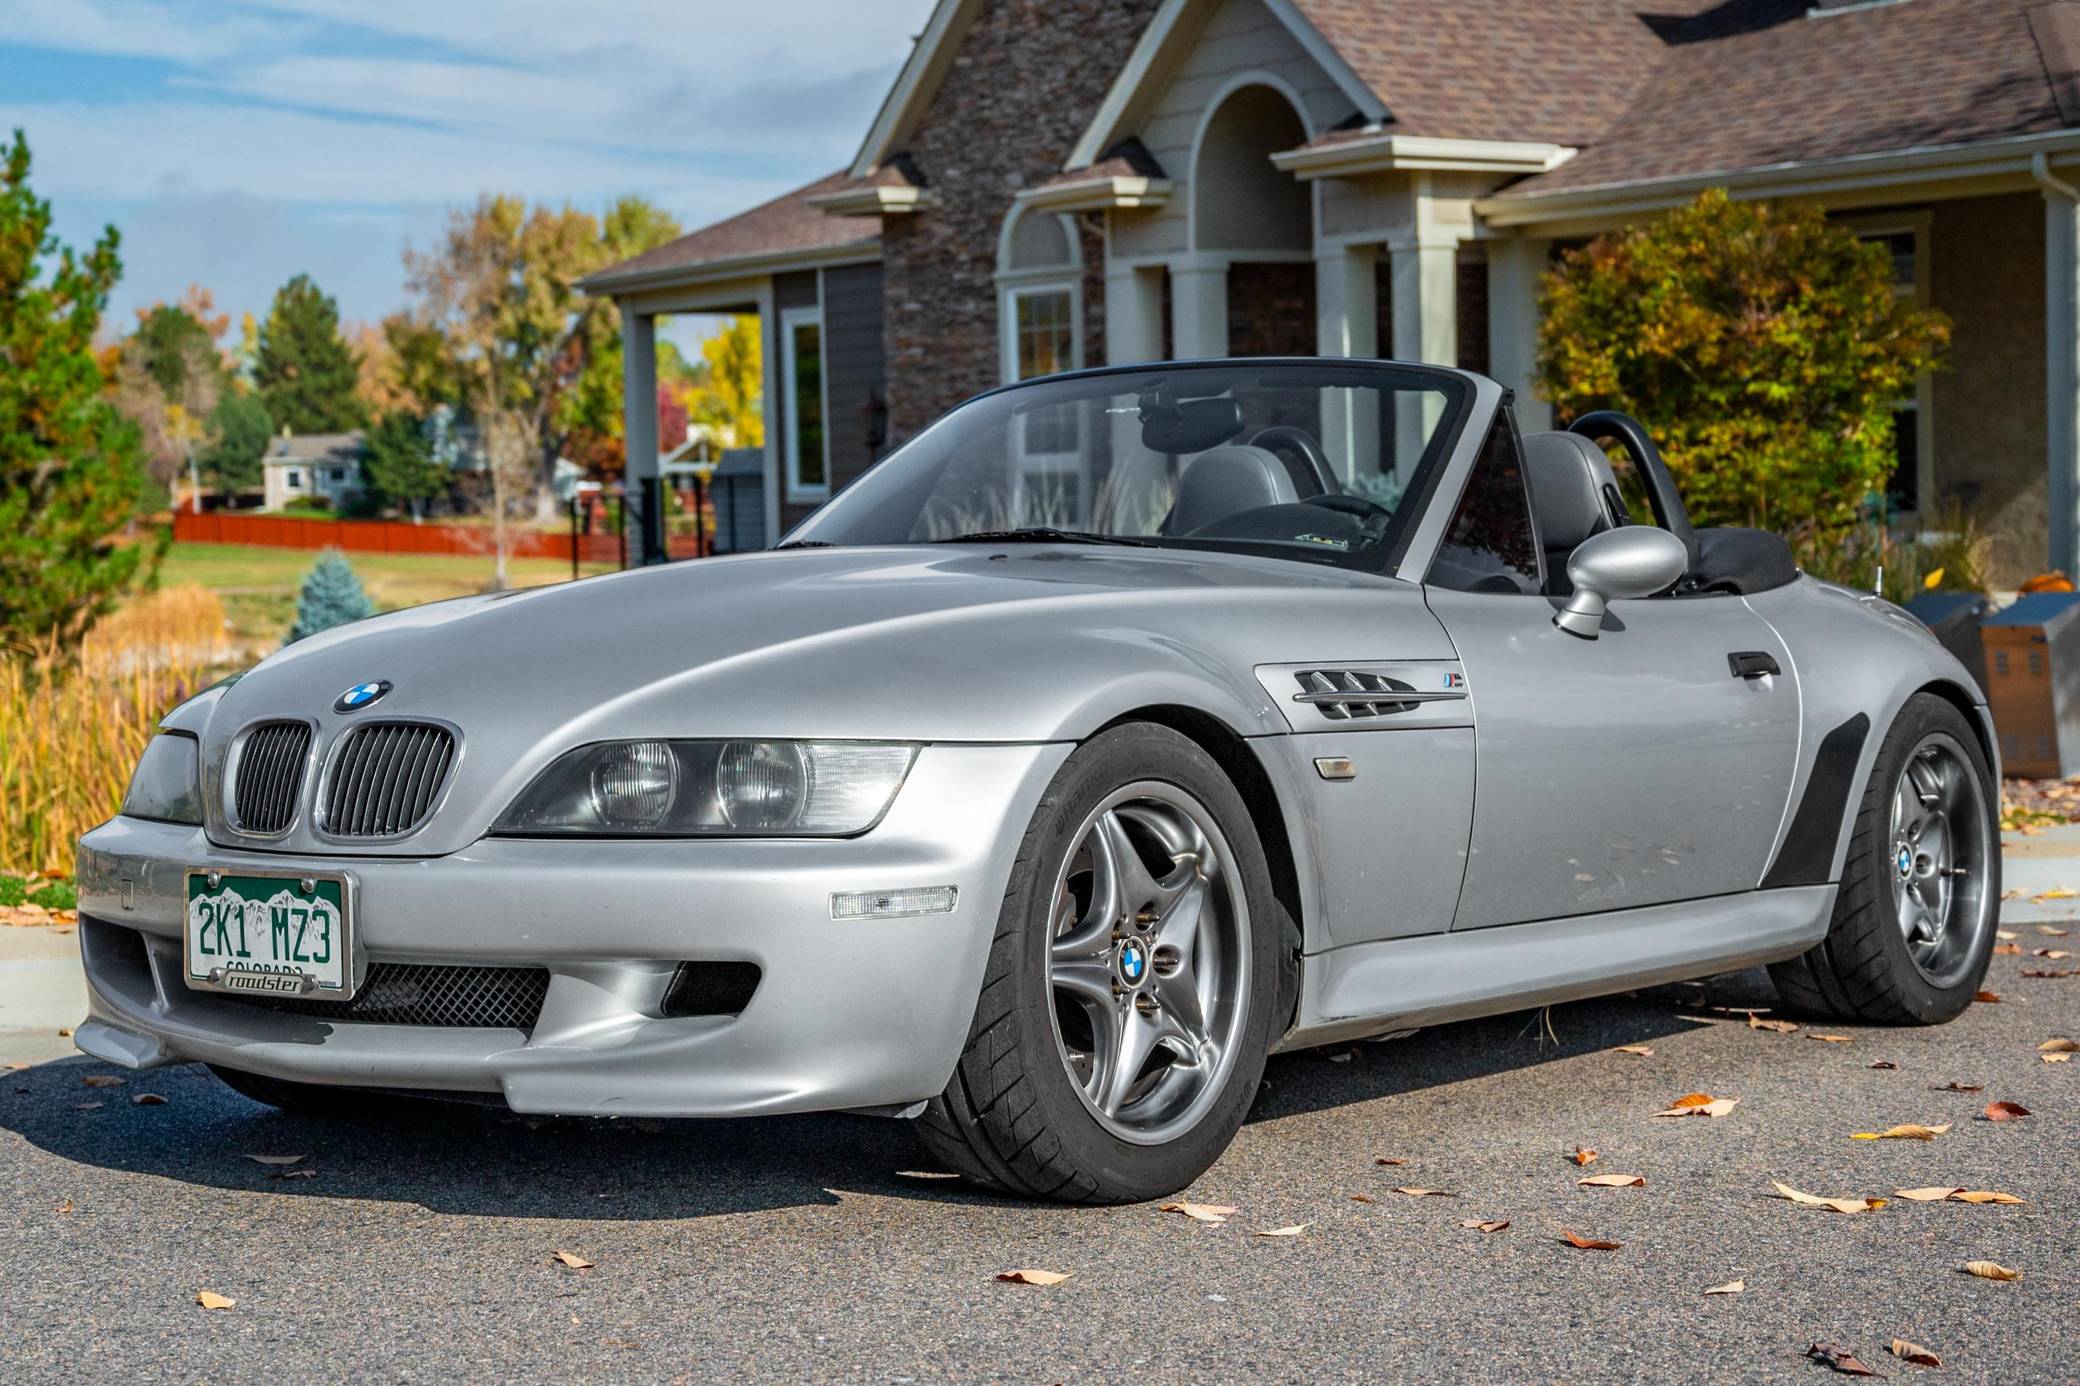 This is a V12-powered BMW Z3